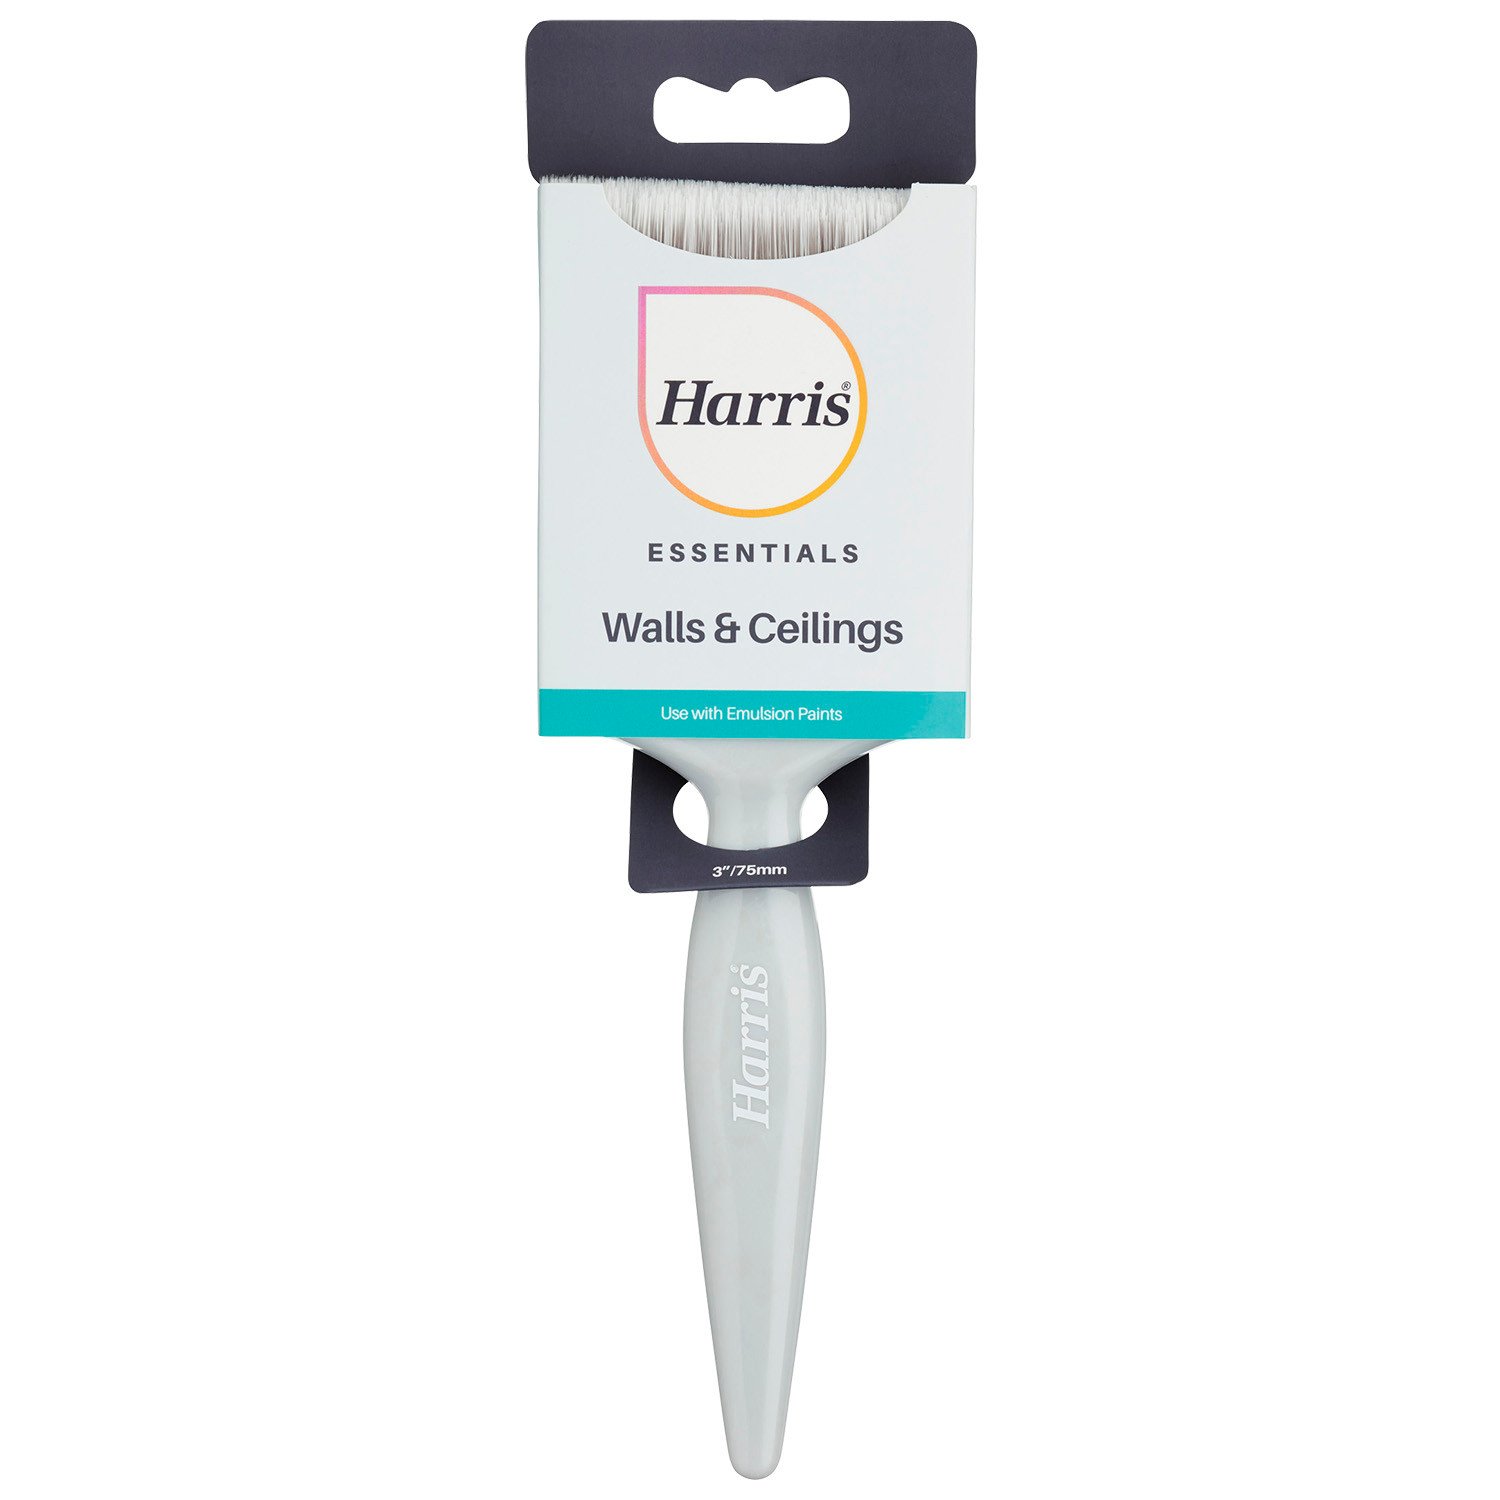 Harris 3 inch Essentials Walls and Ceilings Paint Brush Image 1